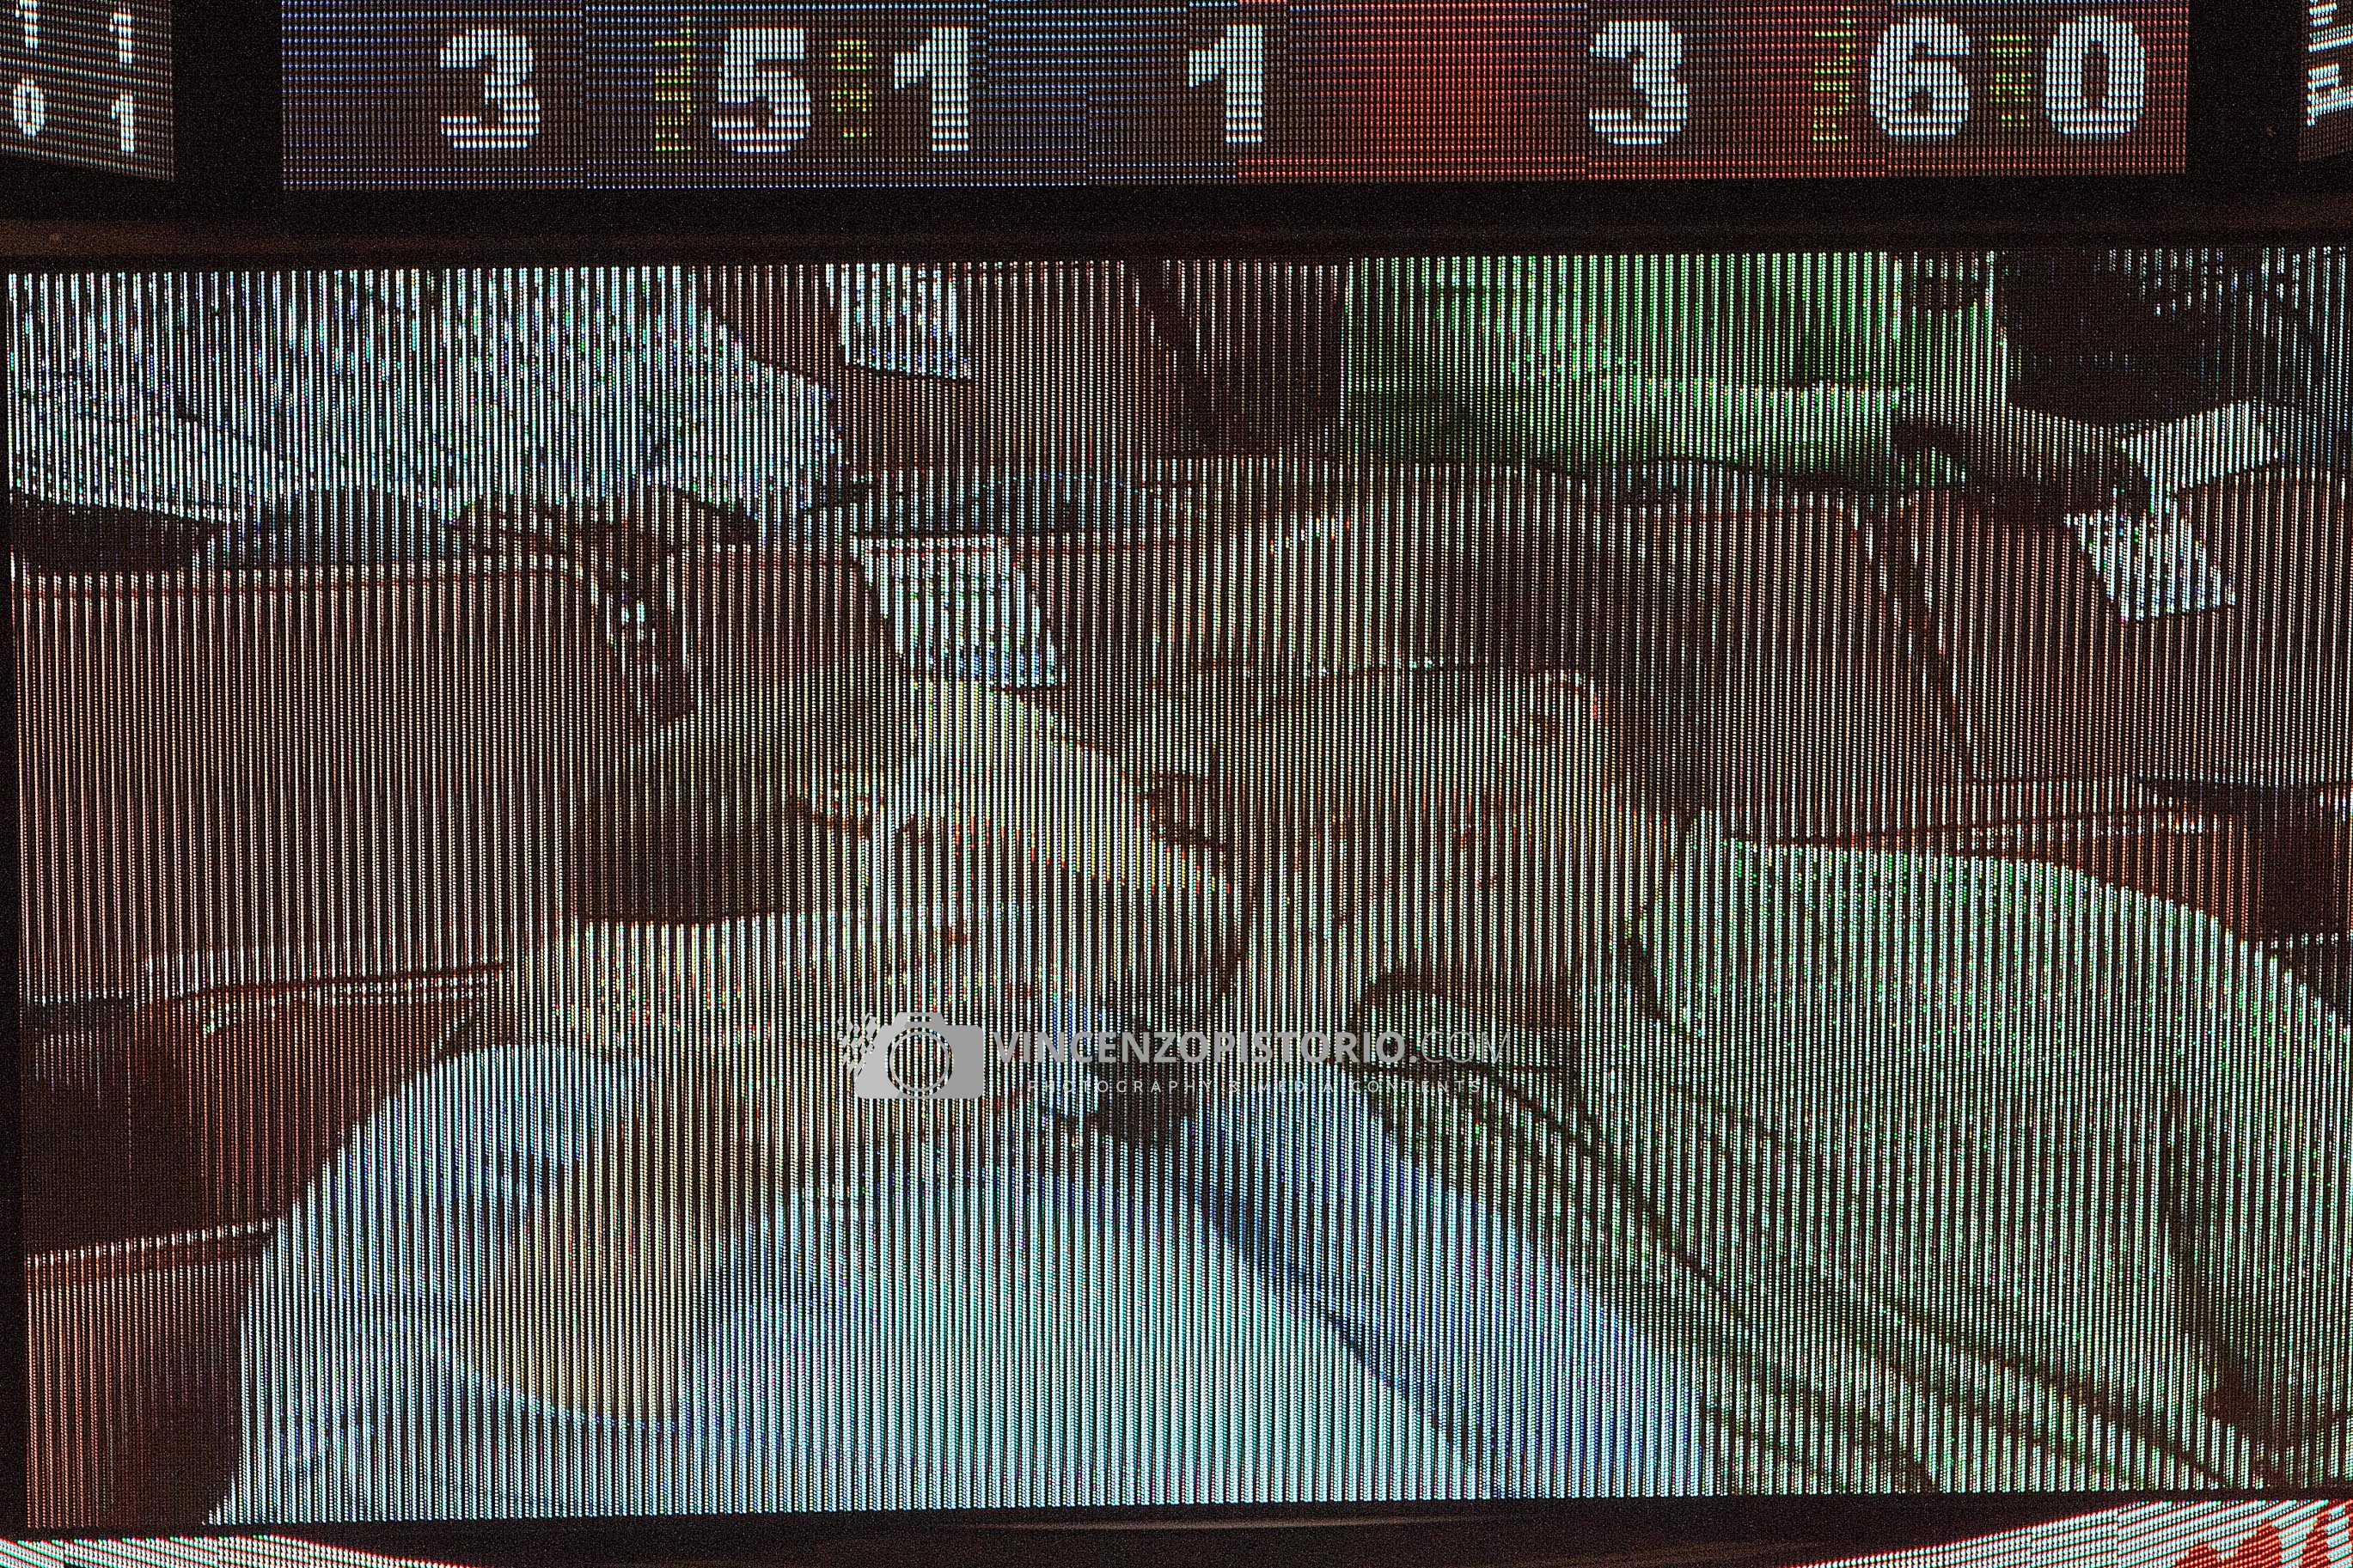 A kiss on the Video Wall